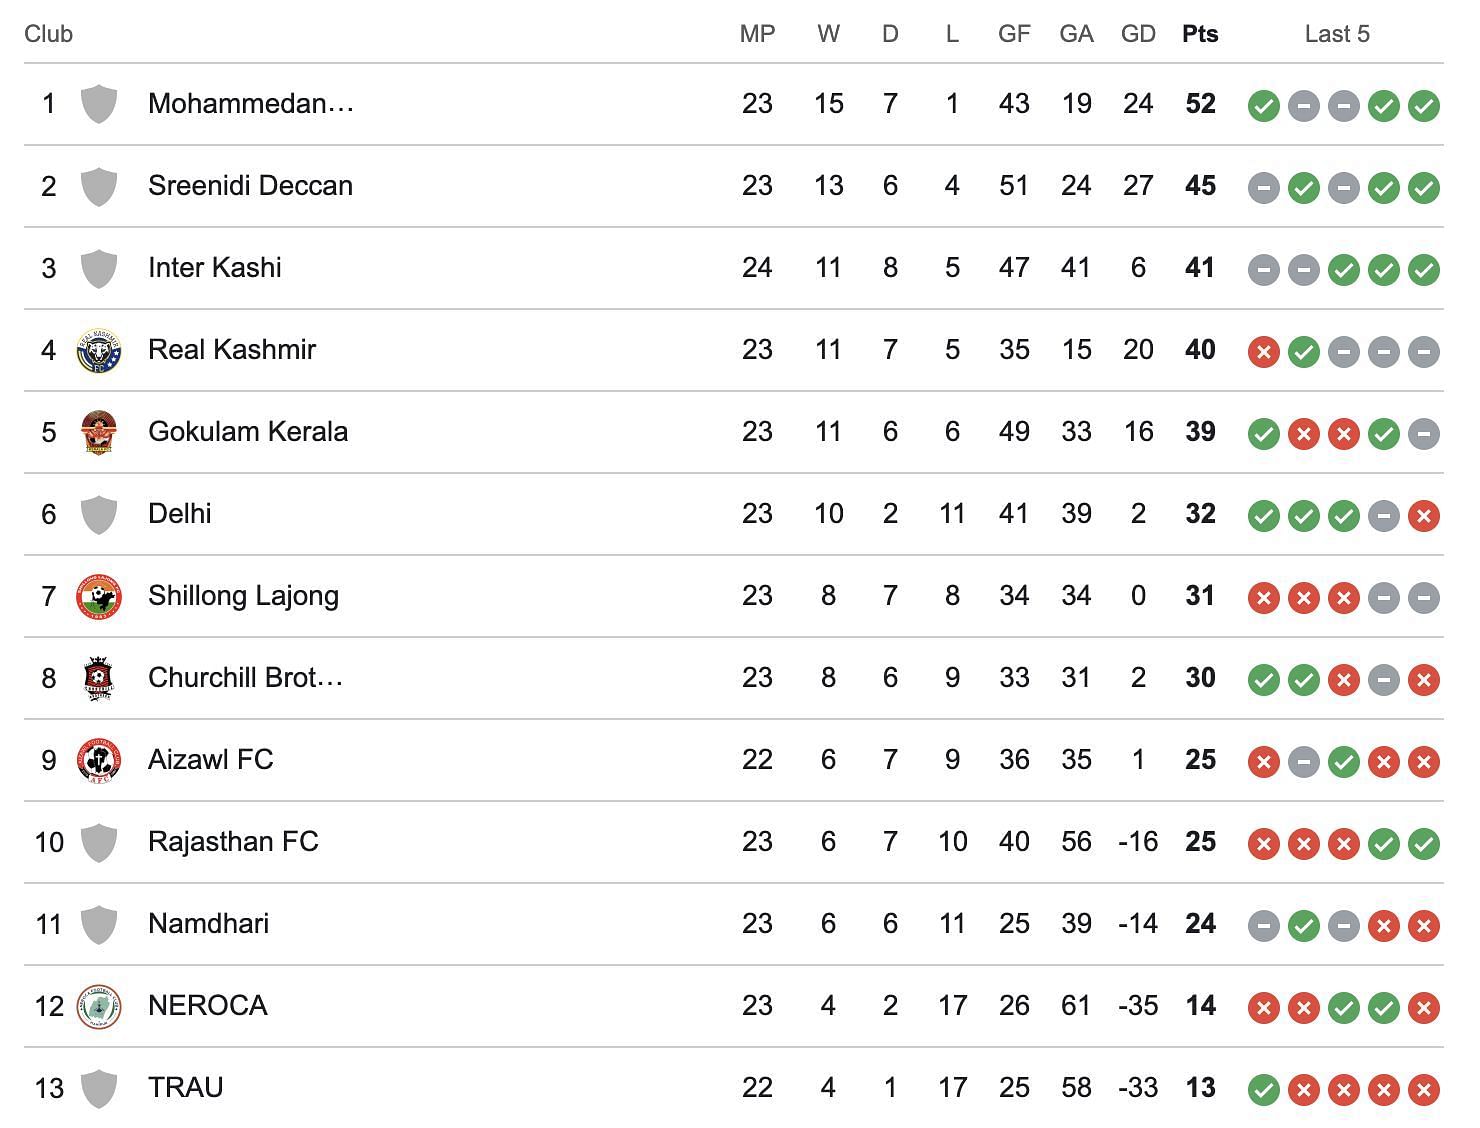 A look at the standings after the end of Sreenidi Deccan vs Inter Kashi game.